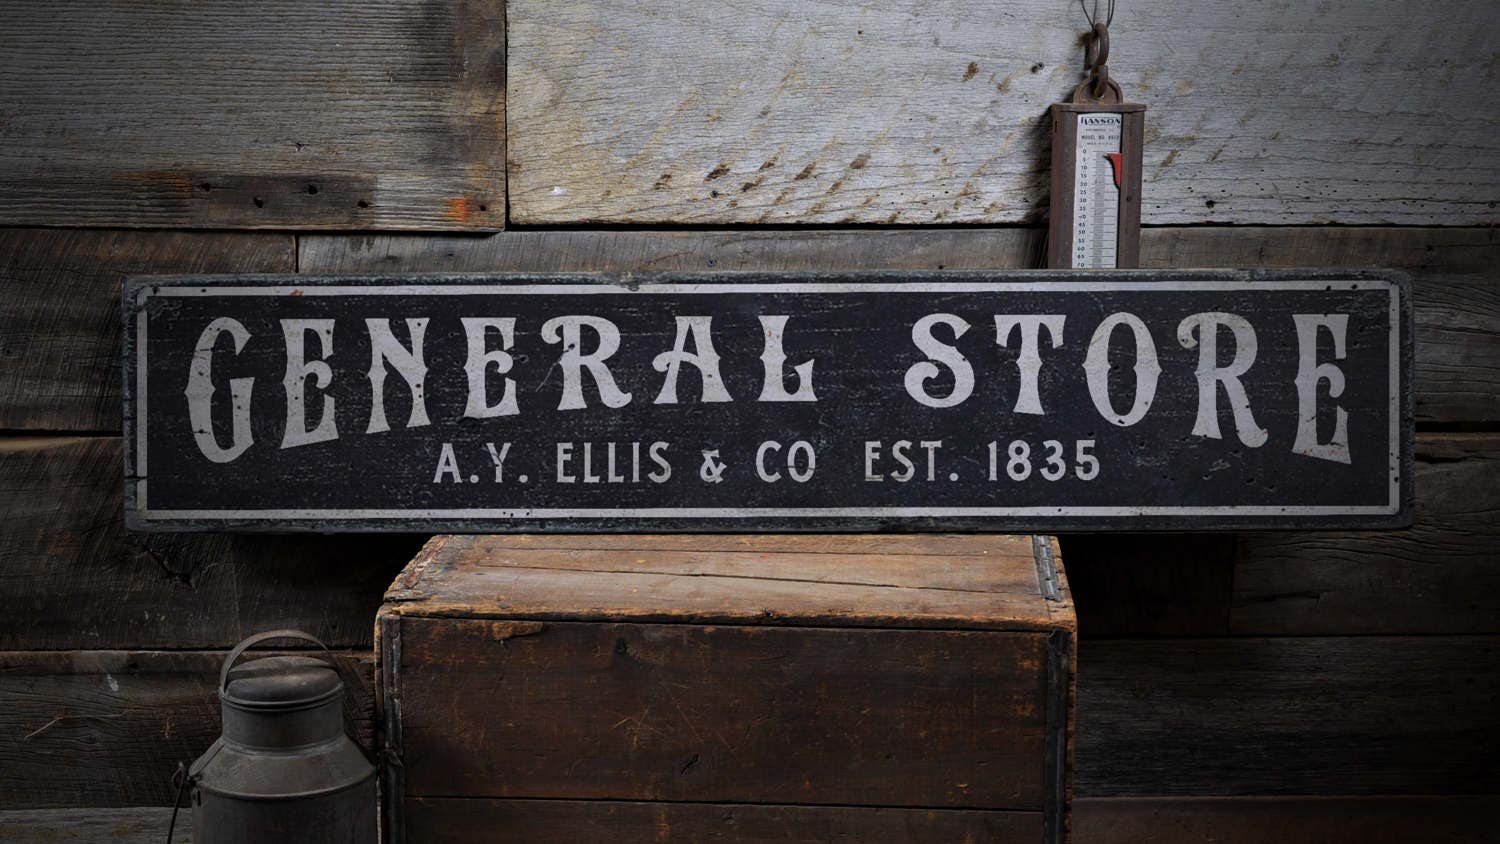  General  Store  Sign  Custom Store  Sign  Rustic Store  Sign  Wood